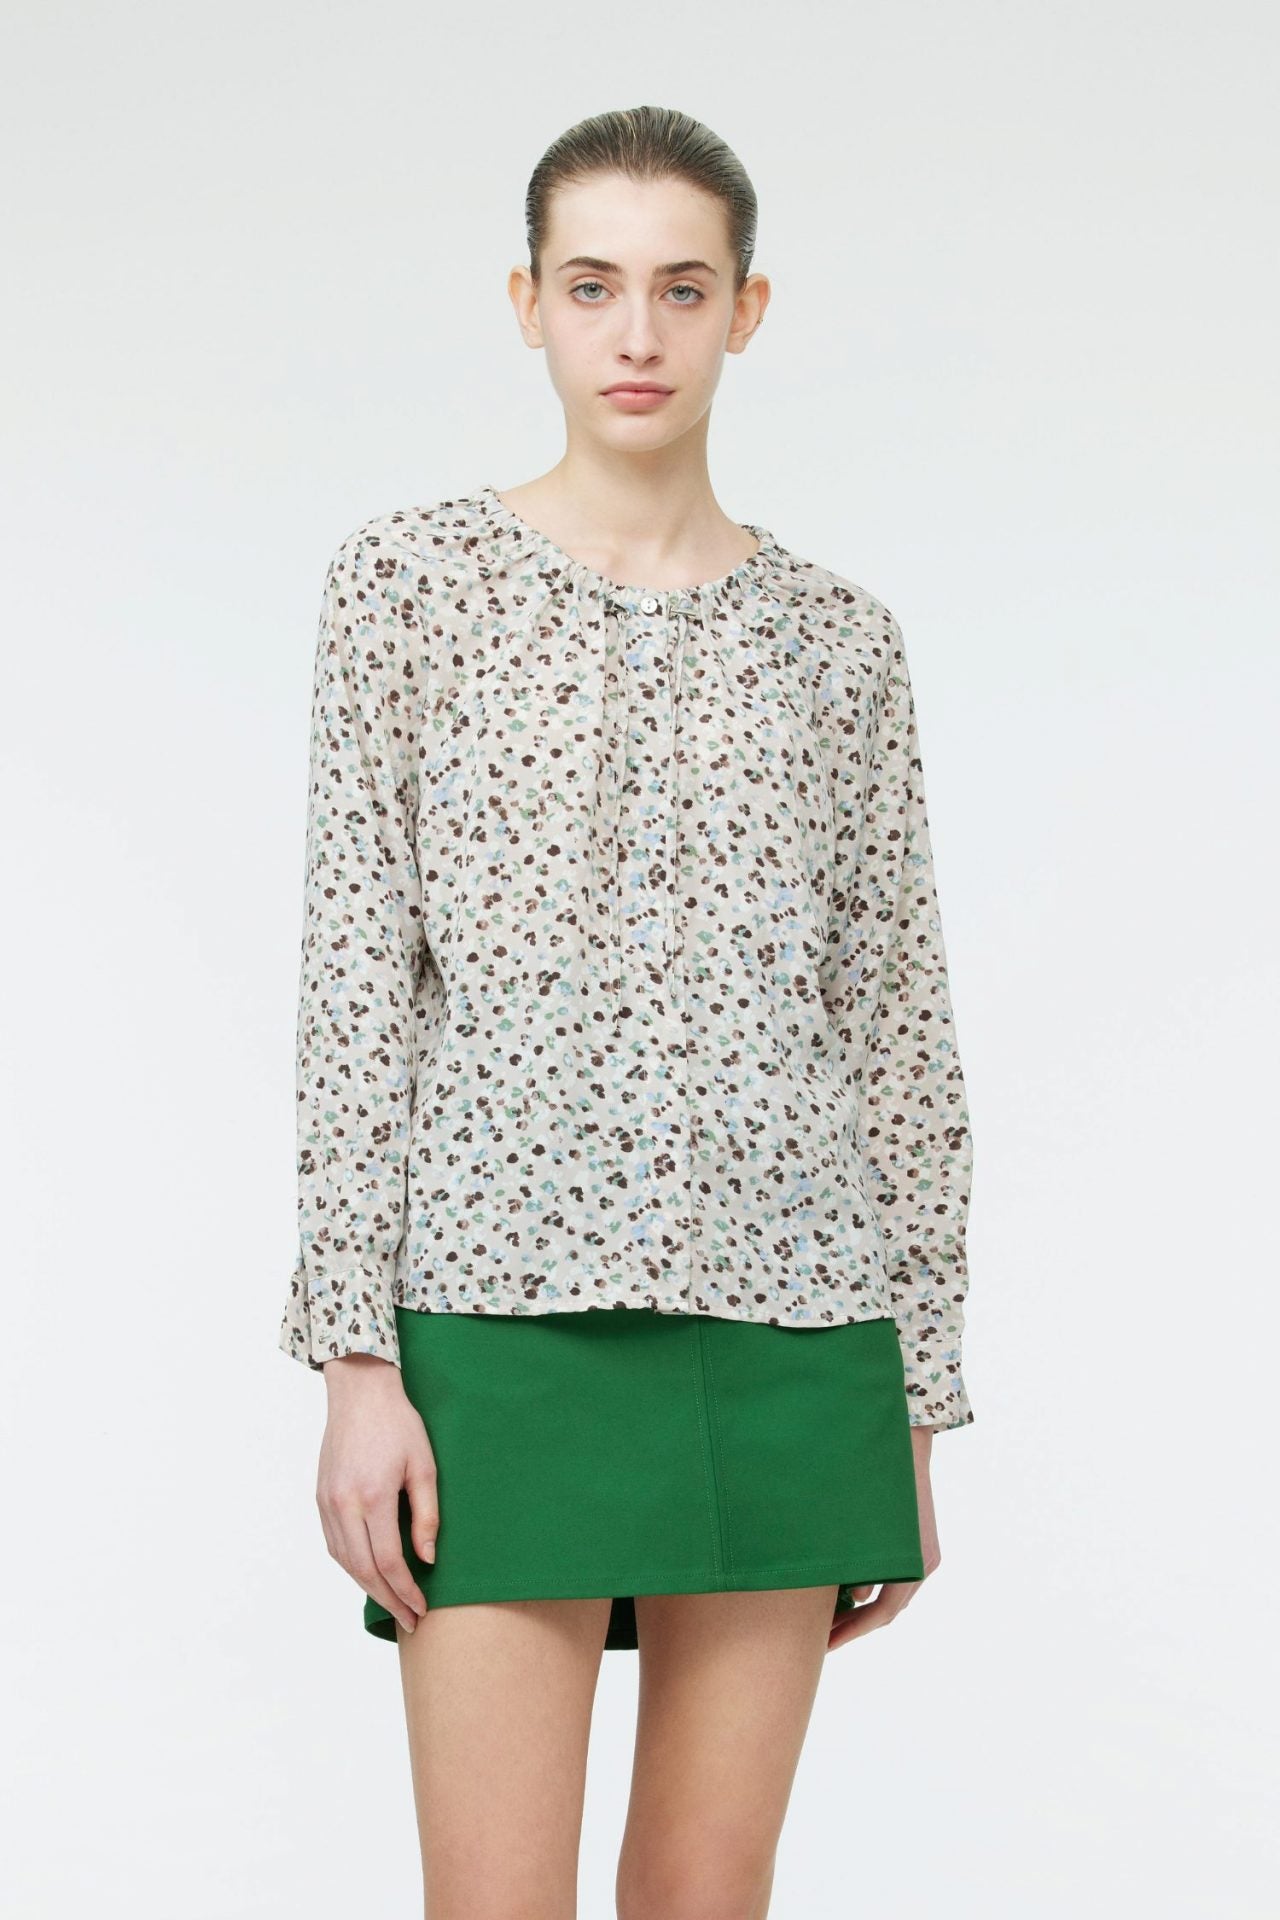 ABL 10957 PRINTED ROUND NECK LONG SLEEVE BLOUSE GREEN FLORAL CROPPED